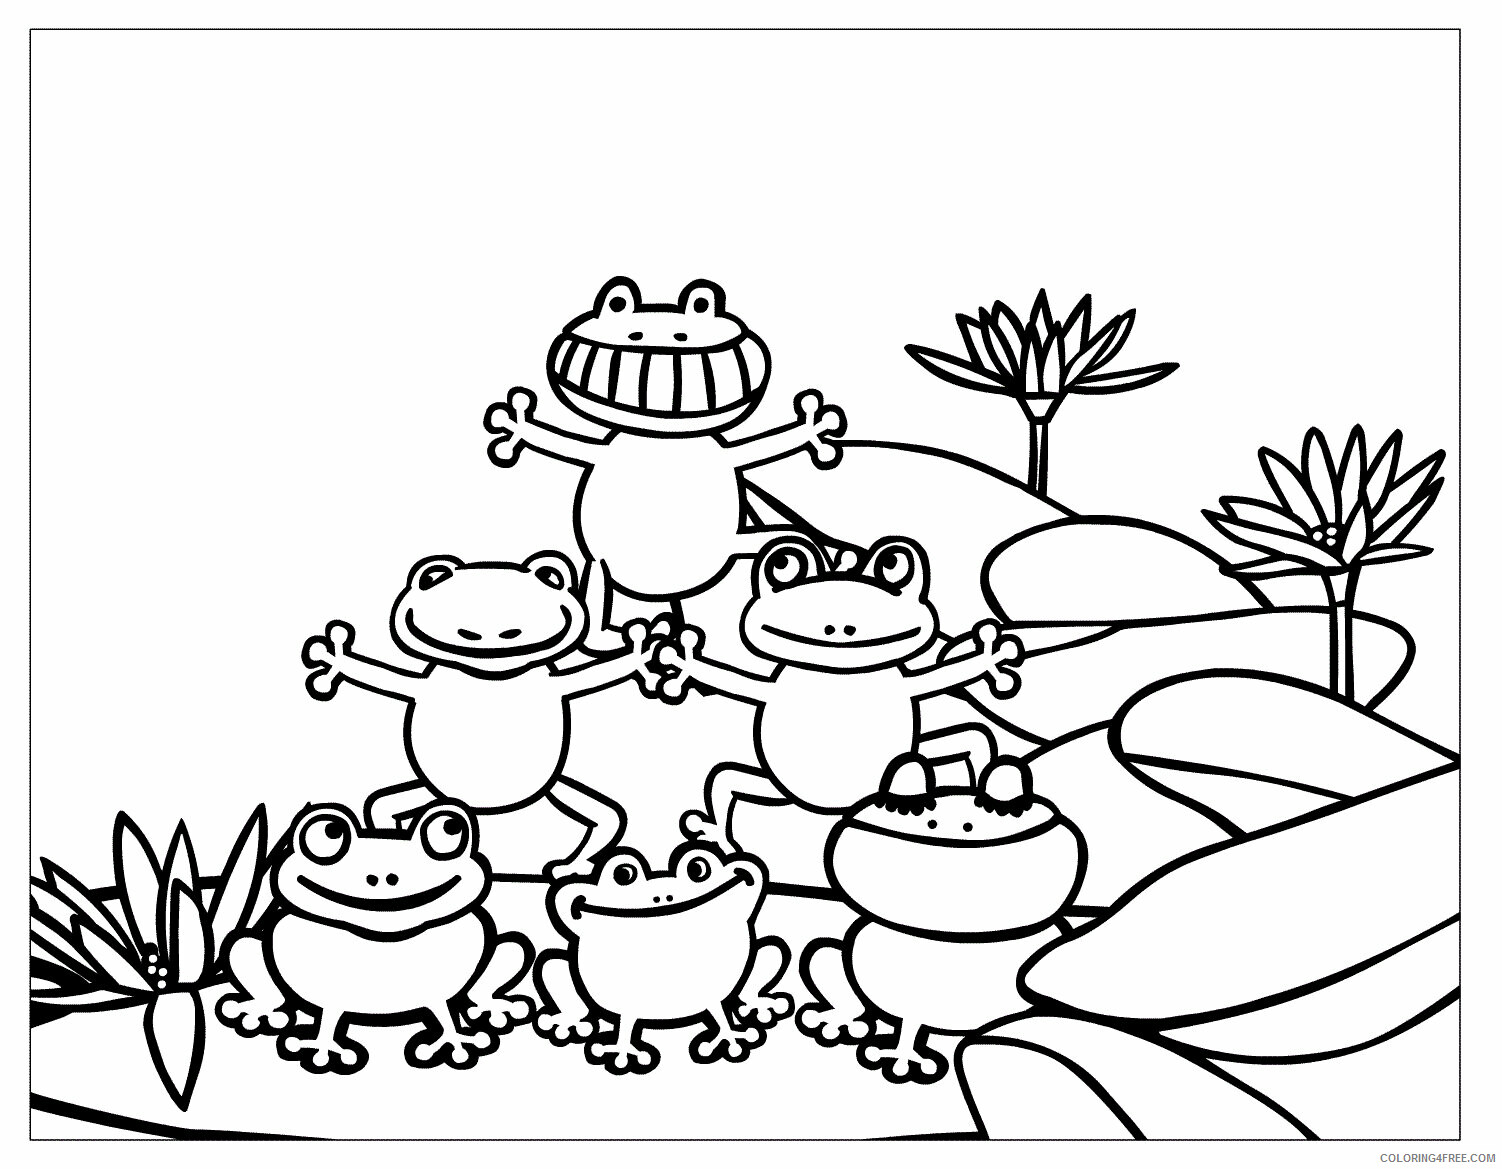 Frog Coloring Pages Animal Printable Sheets Frog 2021 2296 Coloring4free